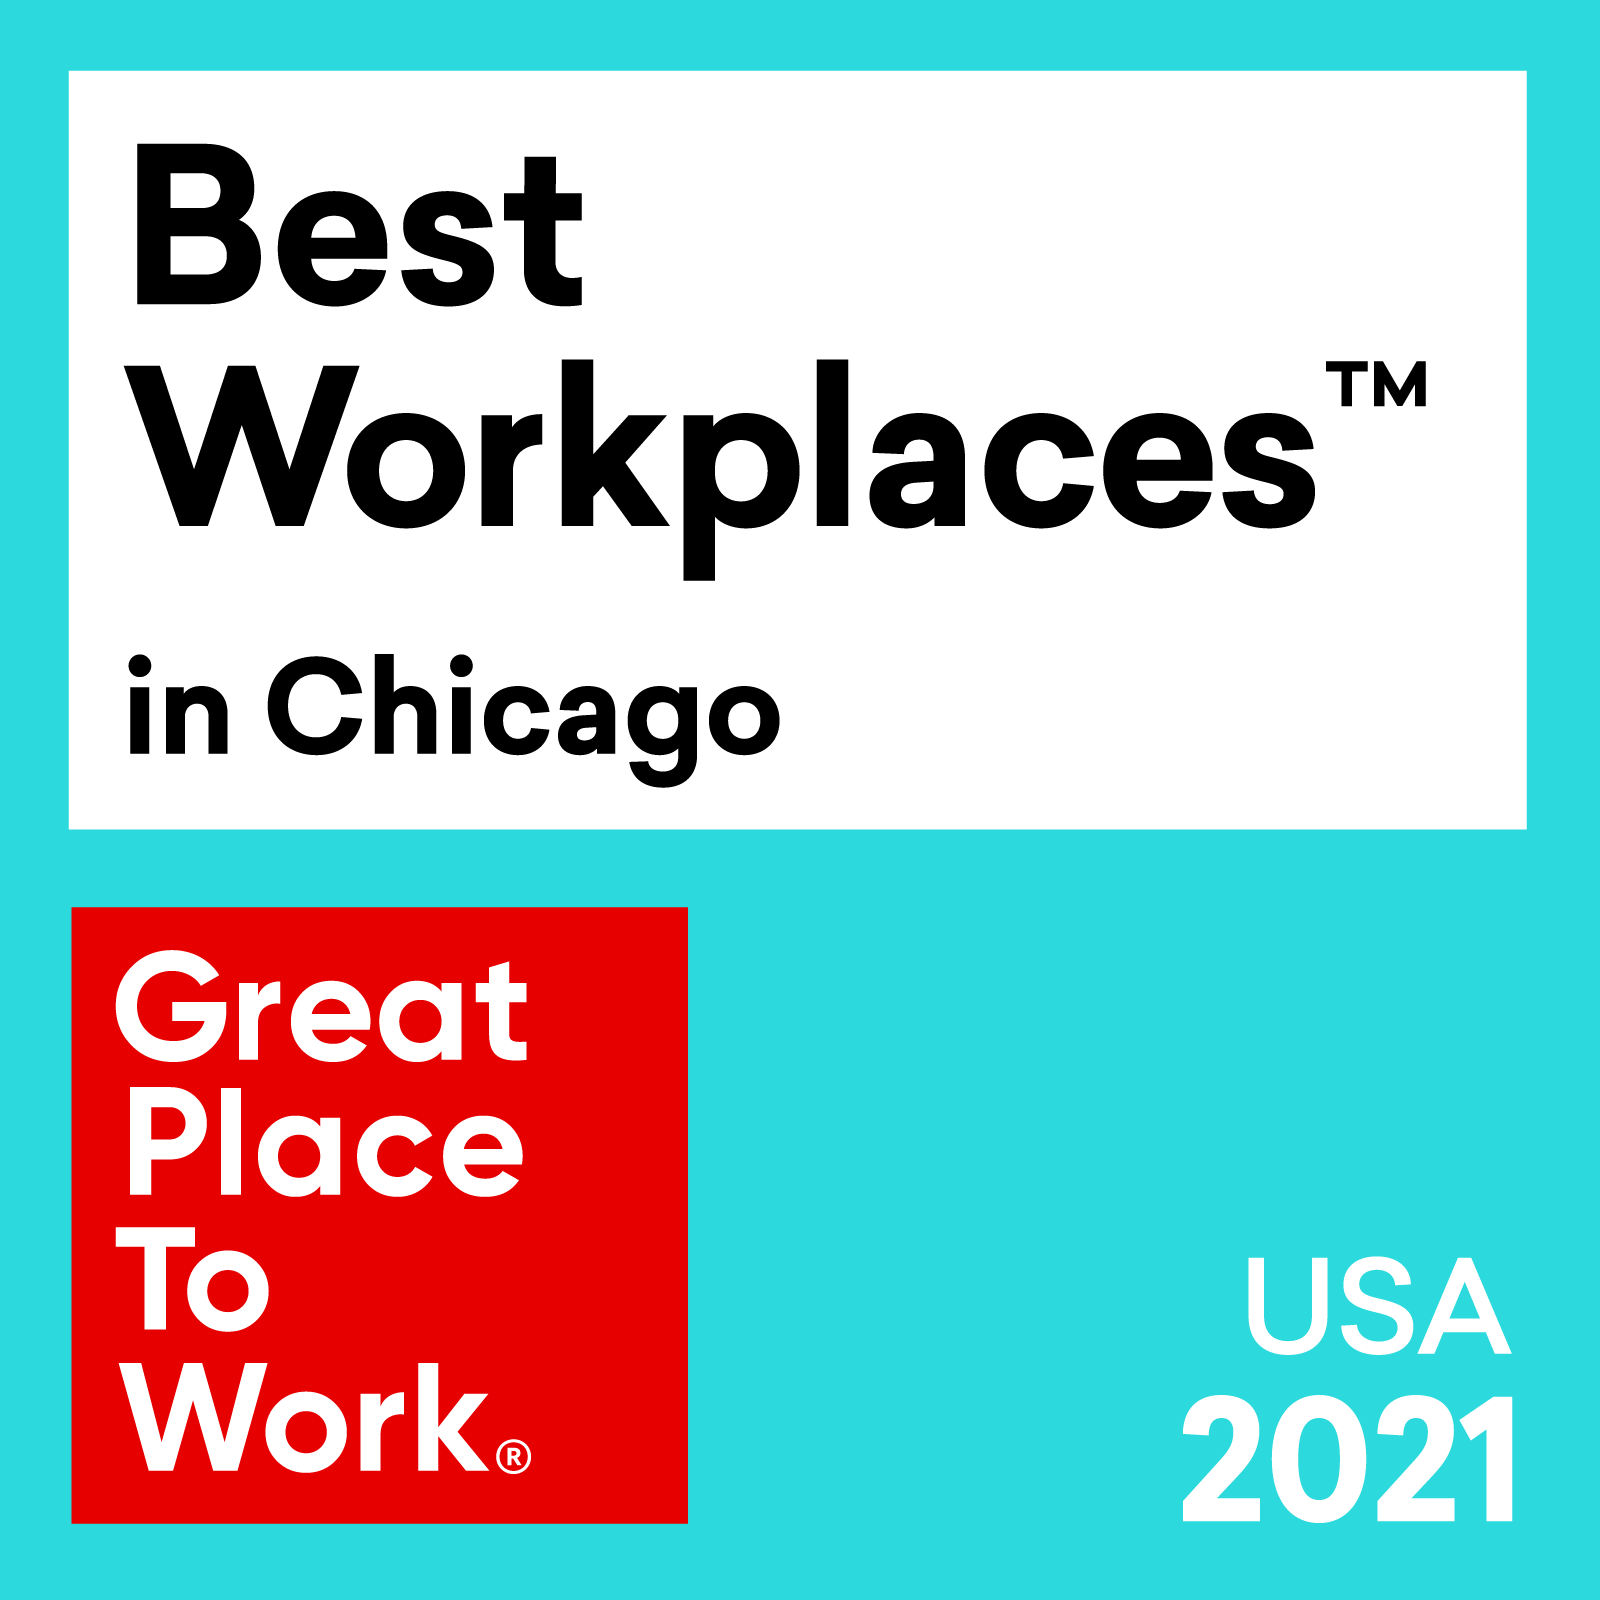 Grantek Named One of the 2021 Best Workplaces in Chicago by Great Place to Work